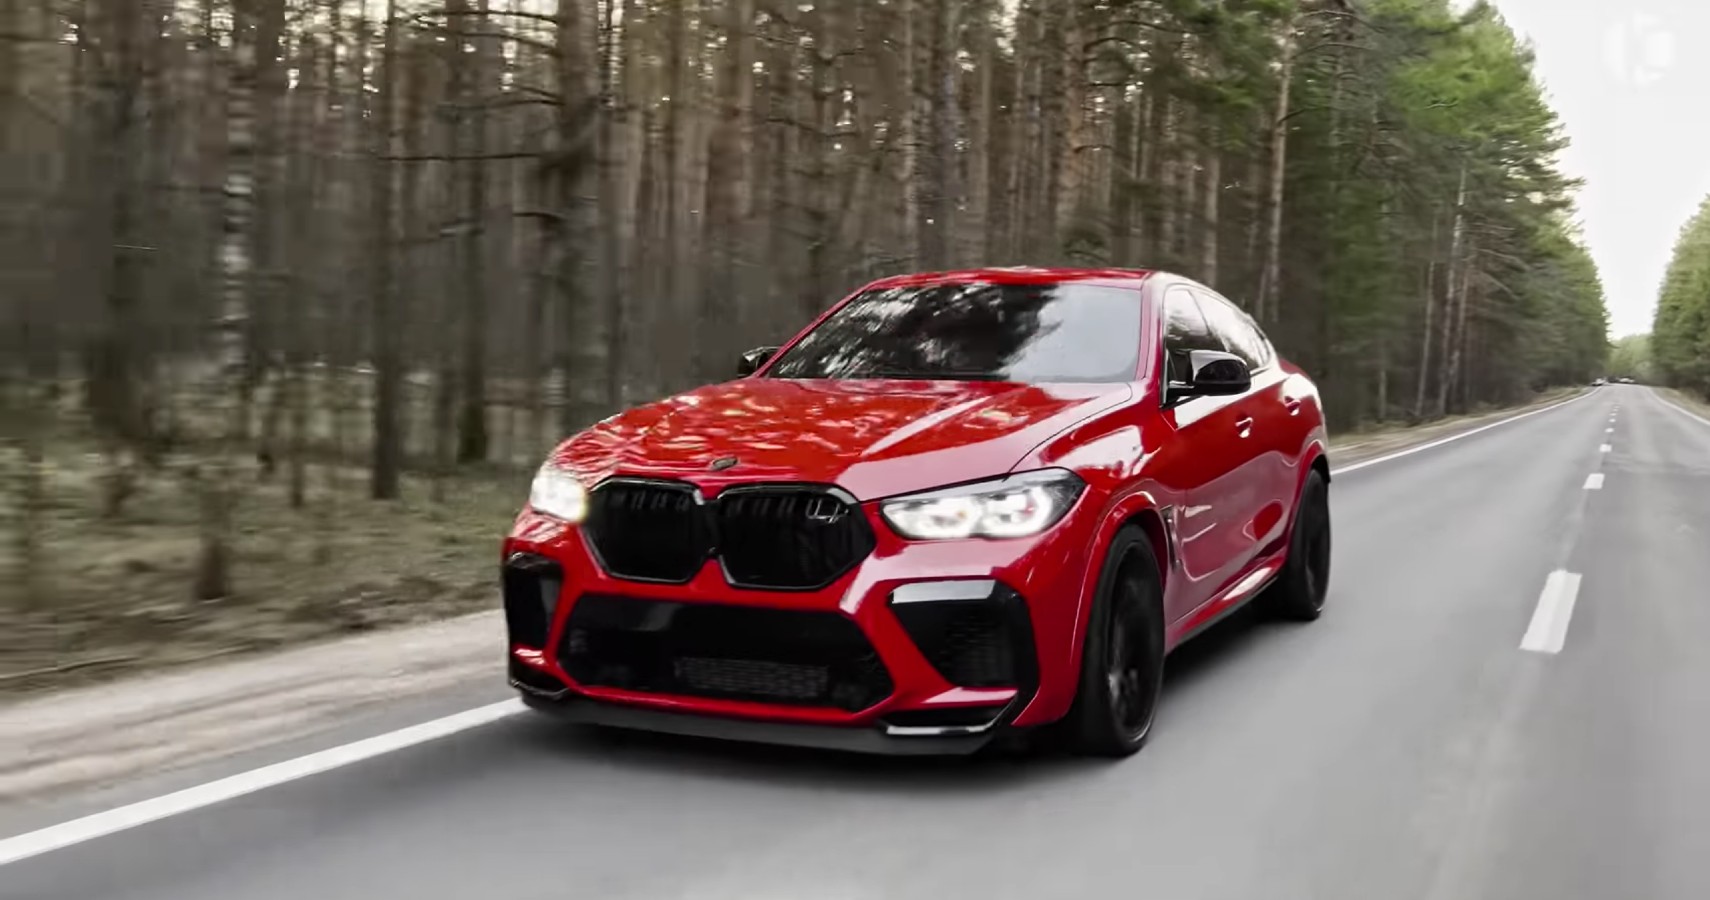 Ultra-BMW X6 M With Akrapovic Exhaust Has Torque, Pops and Bangs - autoevolution